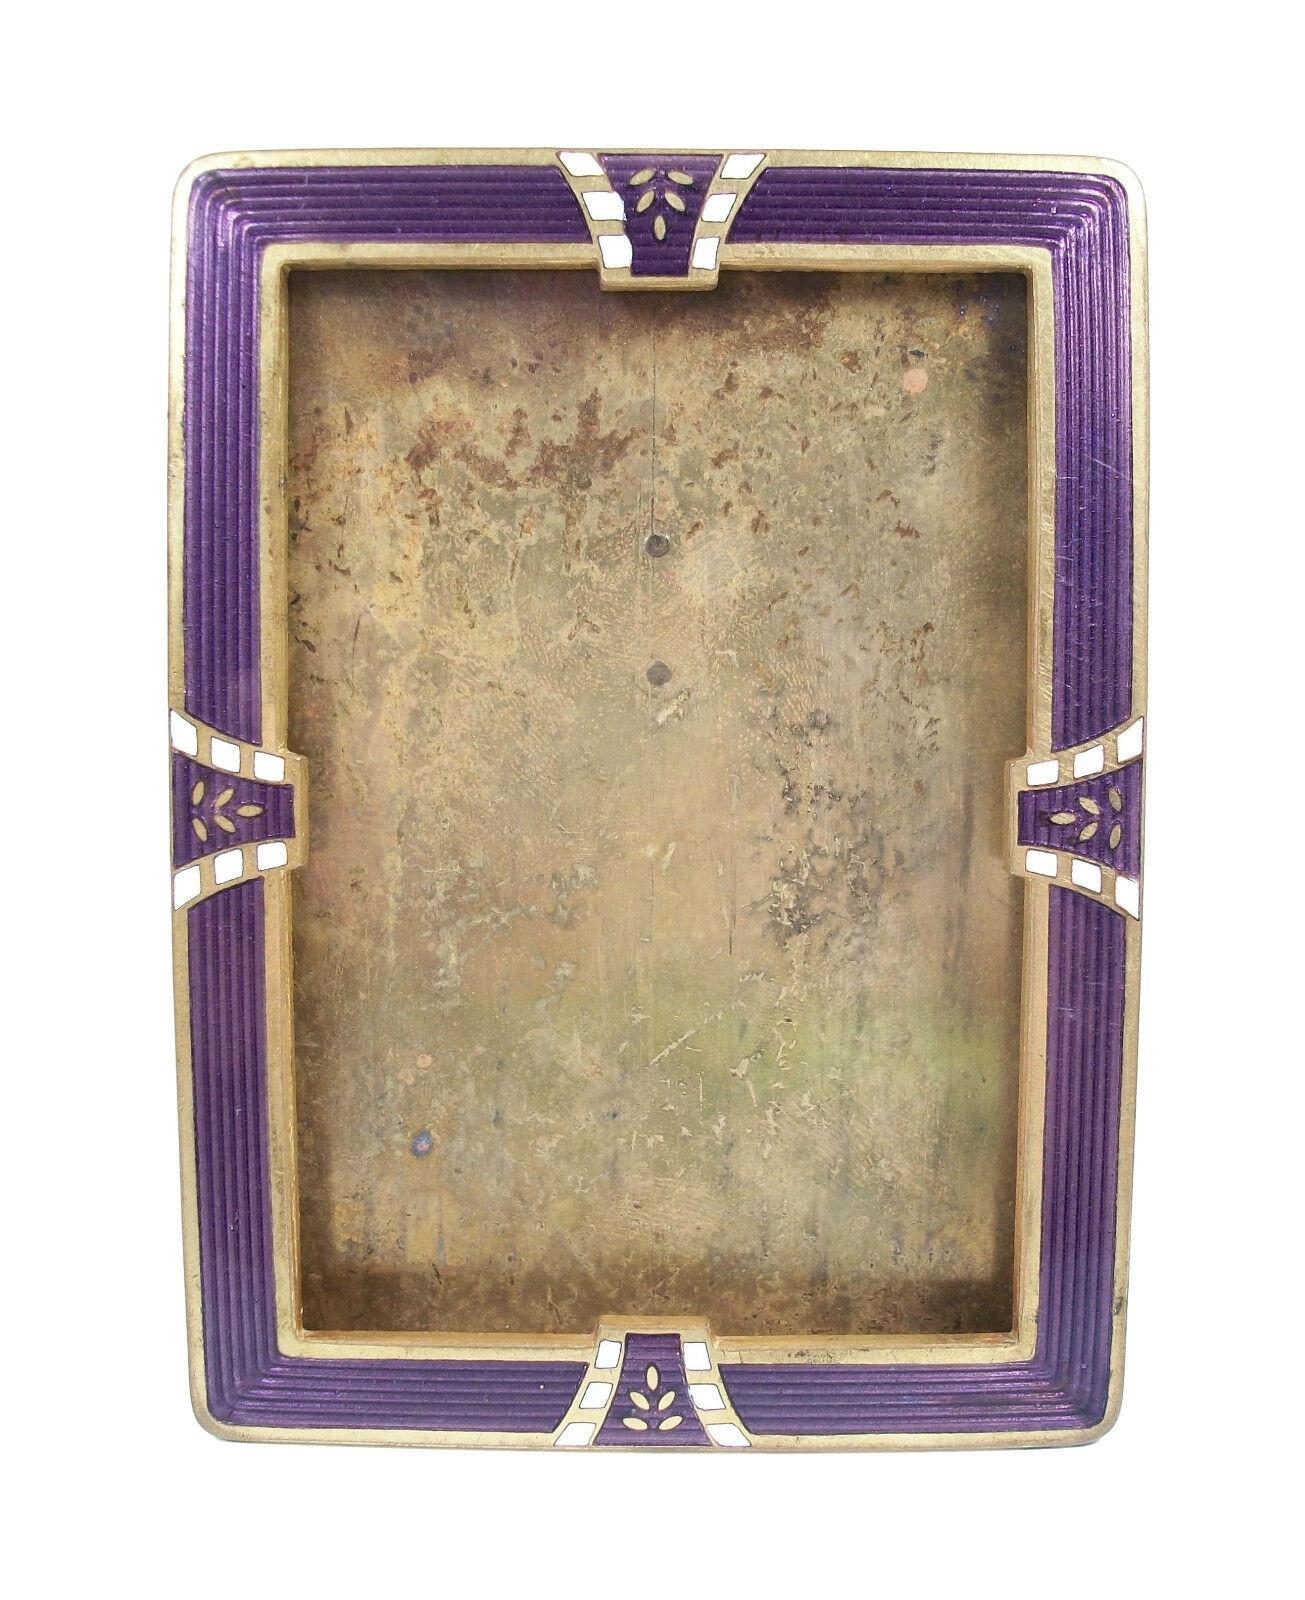 Hand-Crafted Art Deco Enamel & Gilt Brass Picture Frame, Continental, Early 20th Century For Sale